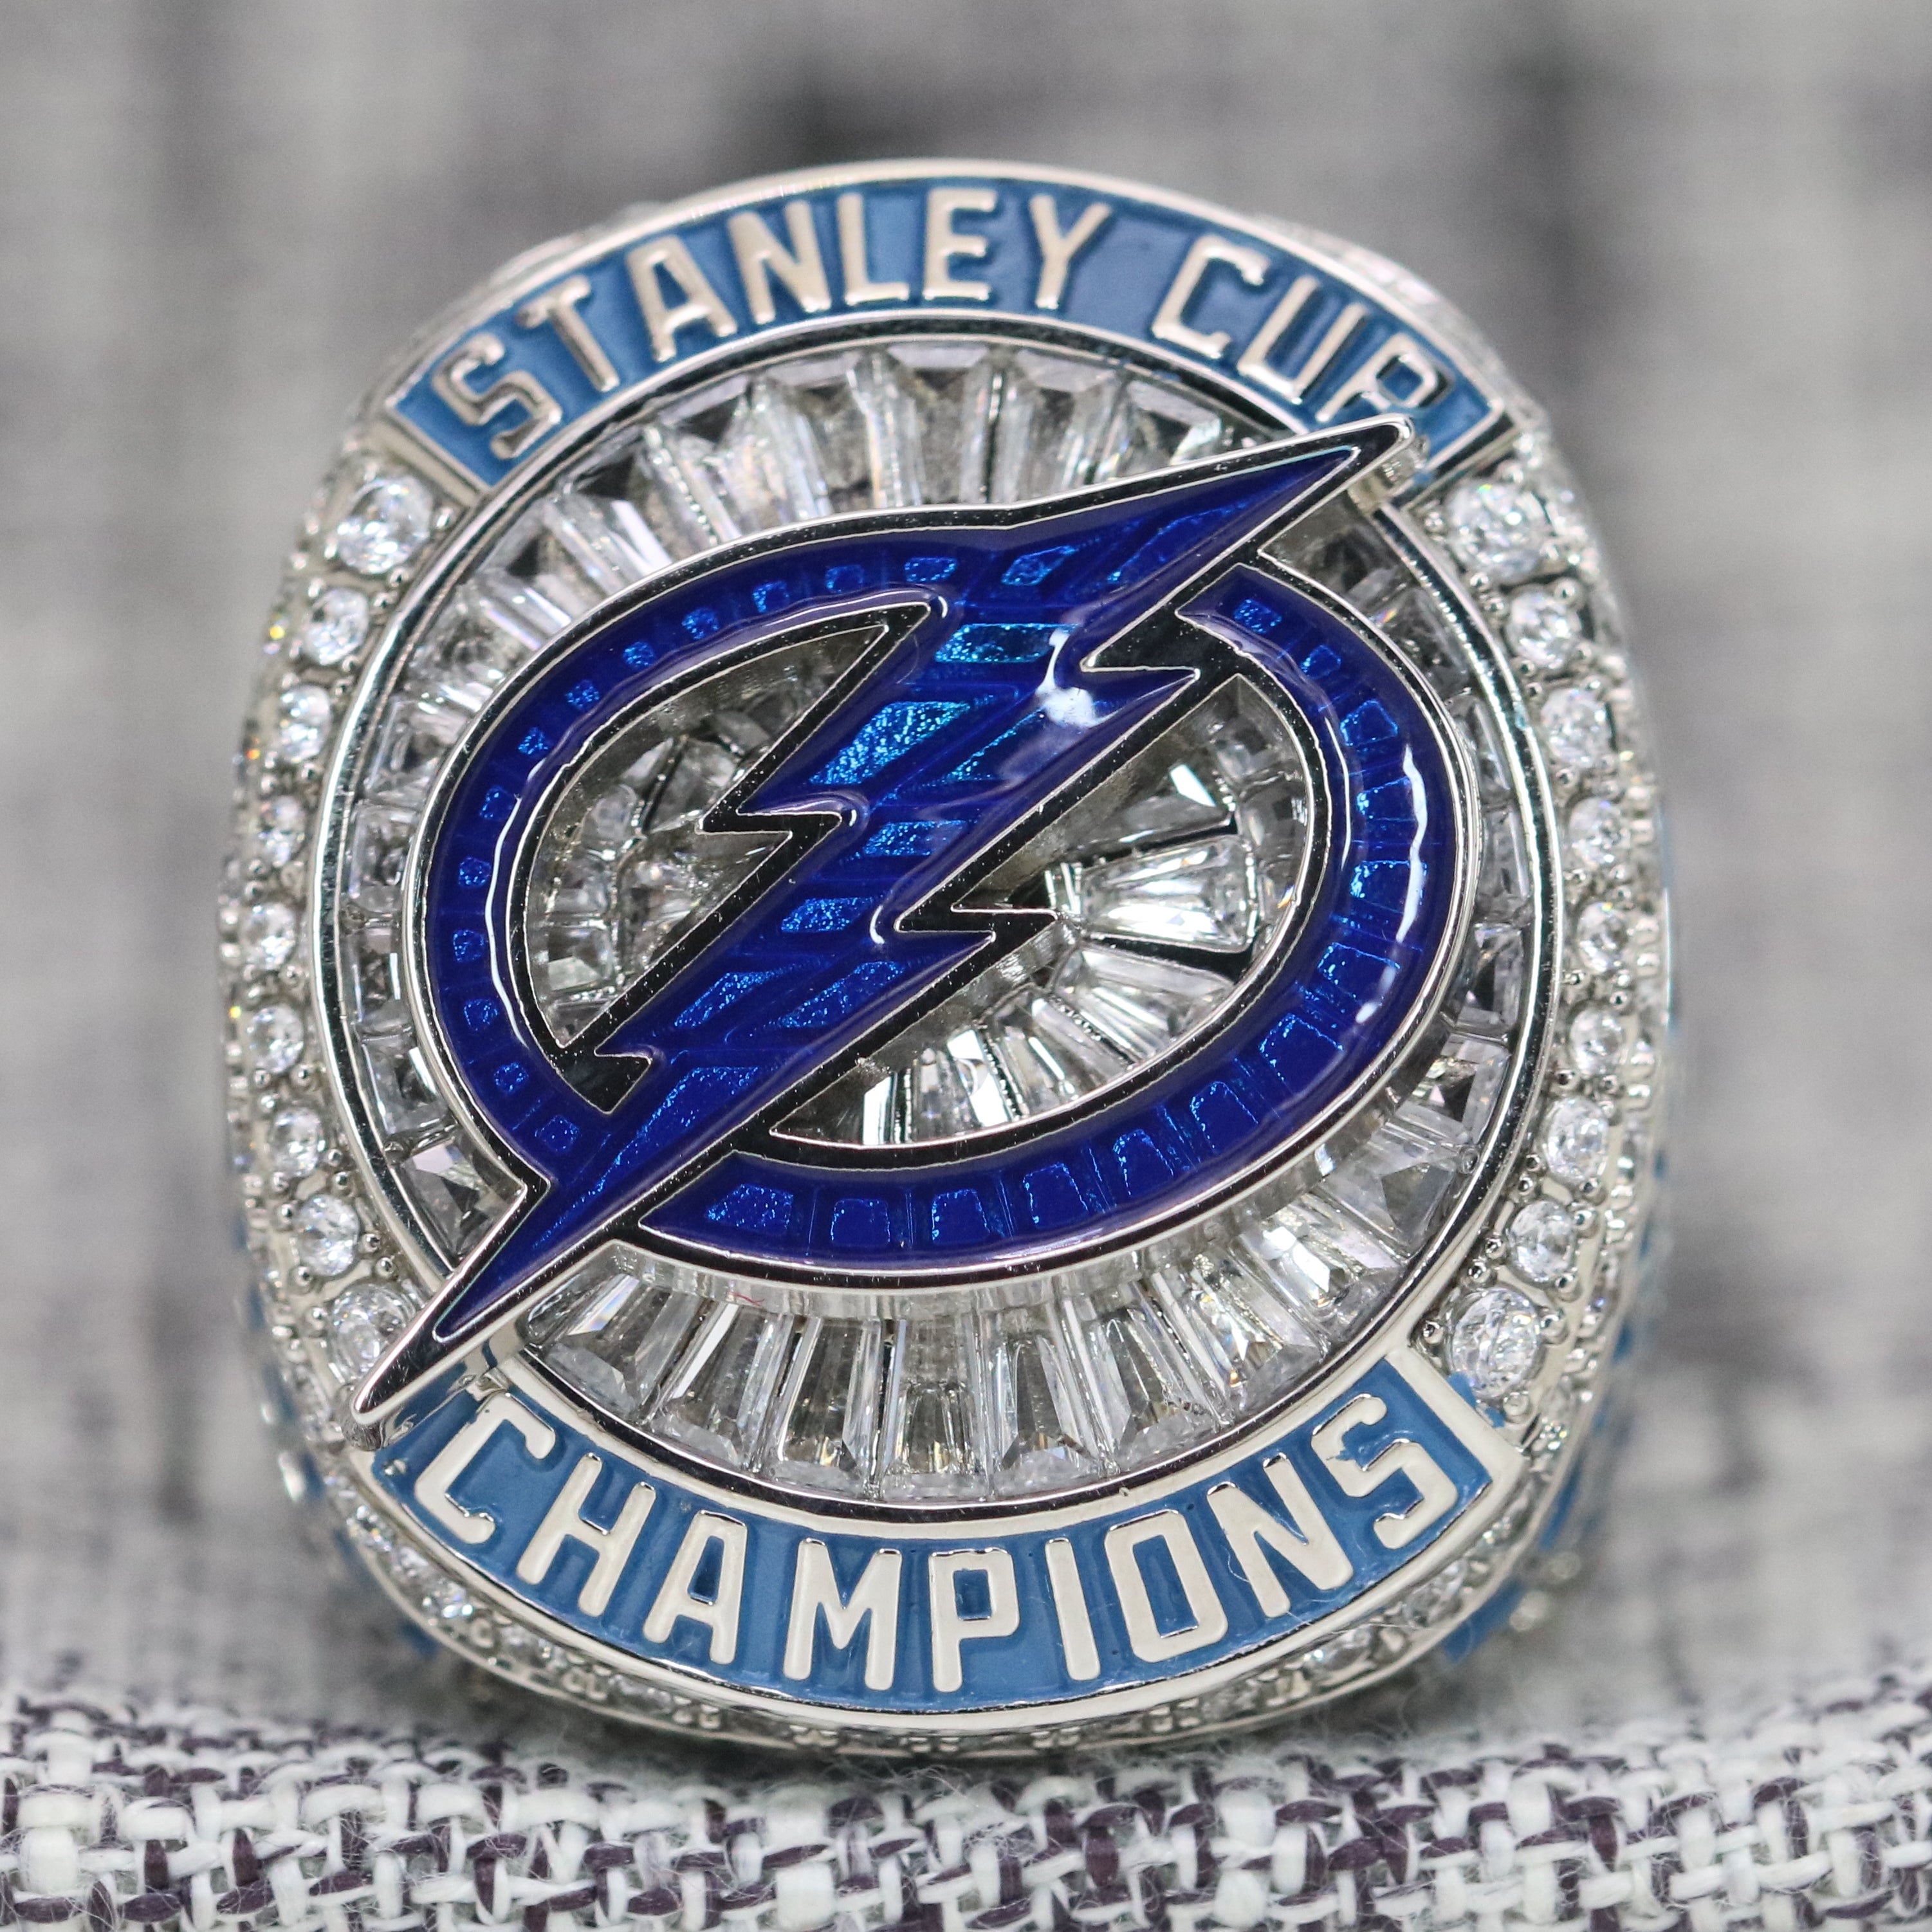 Tampa Bay Lightning reveal their Stanley Cup championship rings